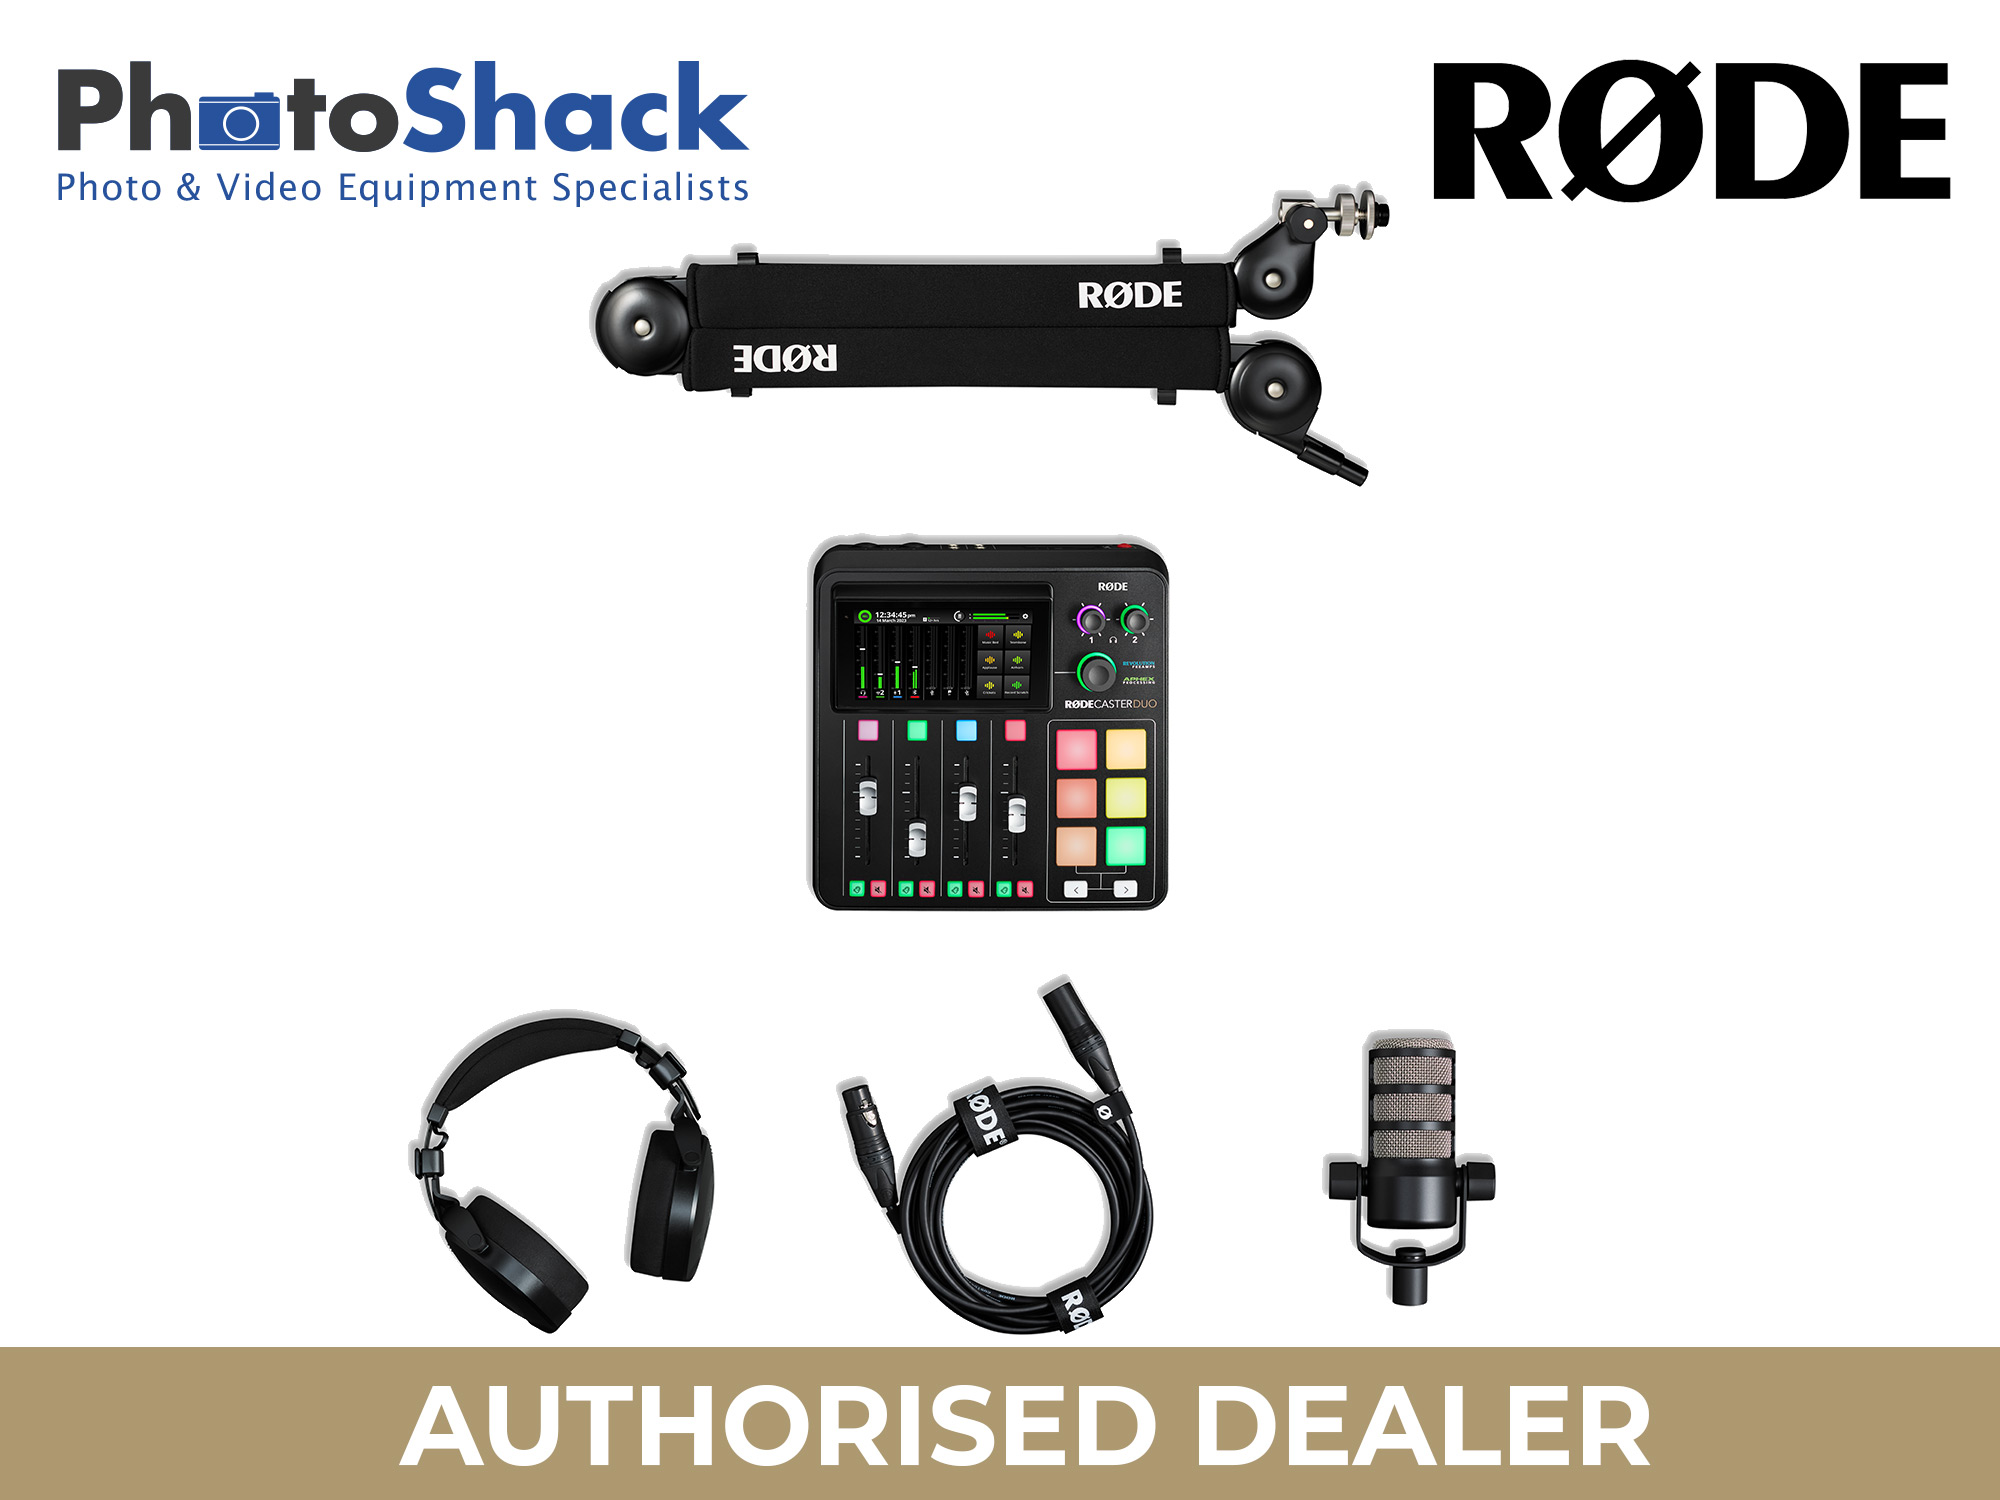 RODE Solo Podcasting Bundle